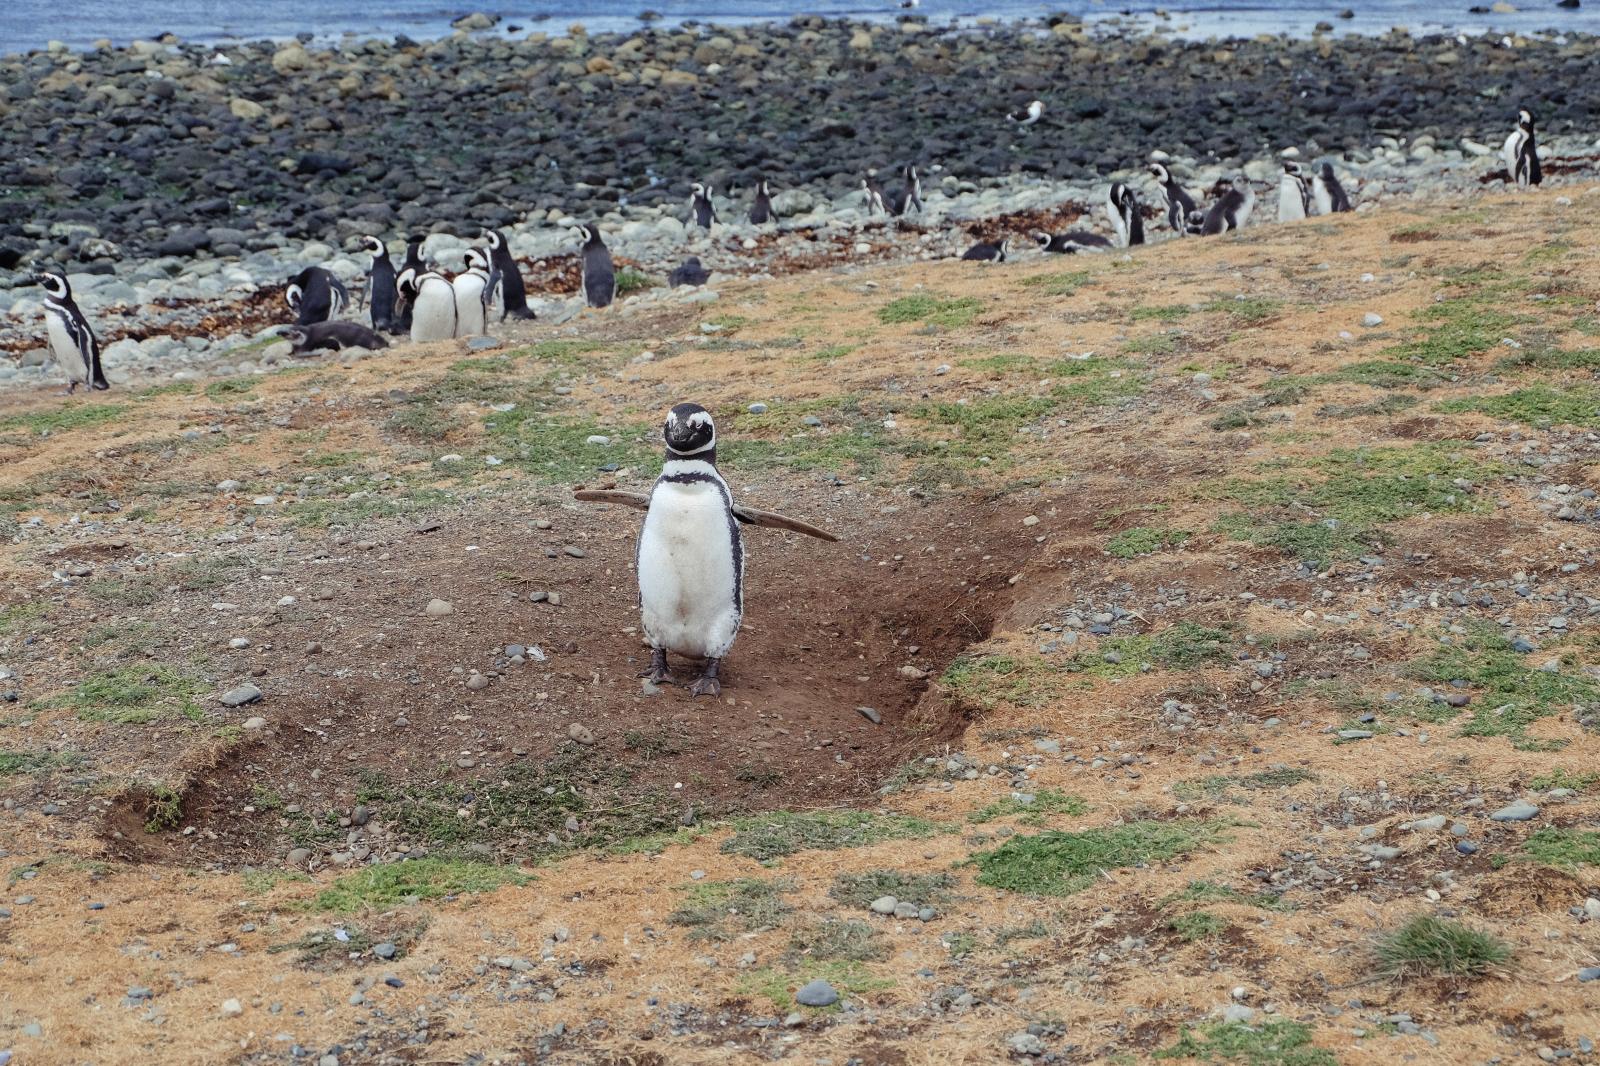 Penguin colony | Buy this image